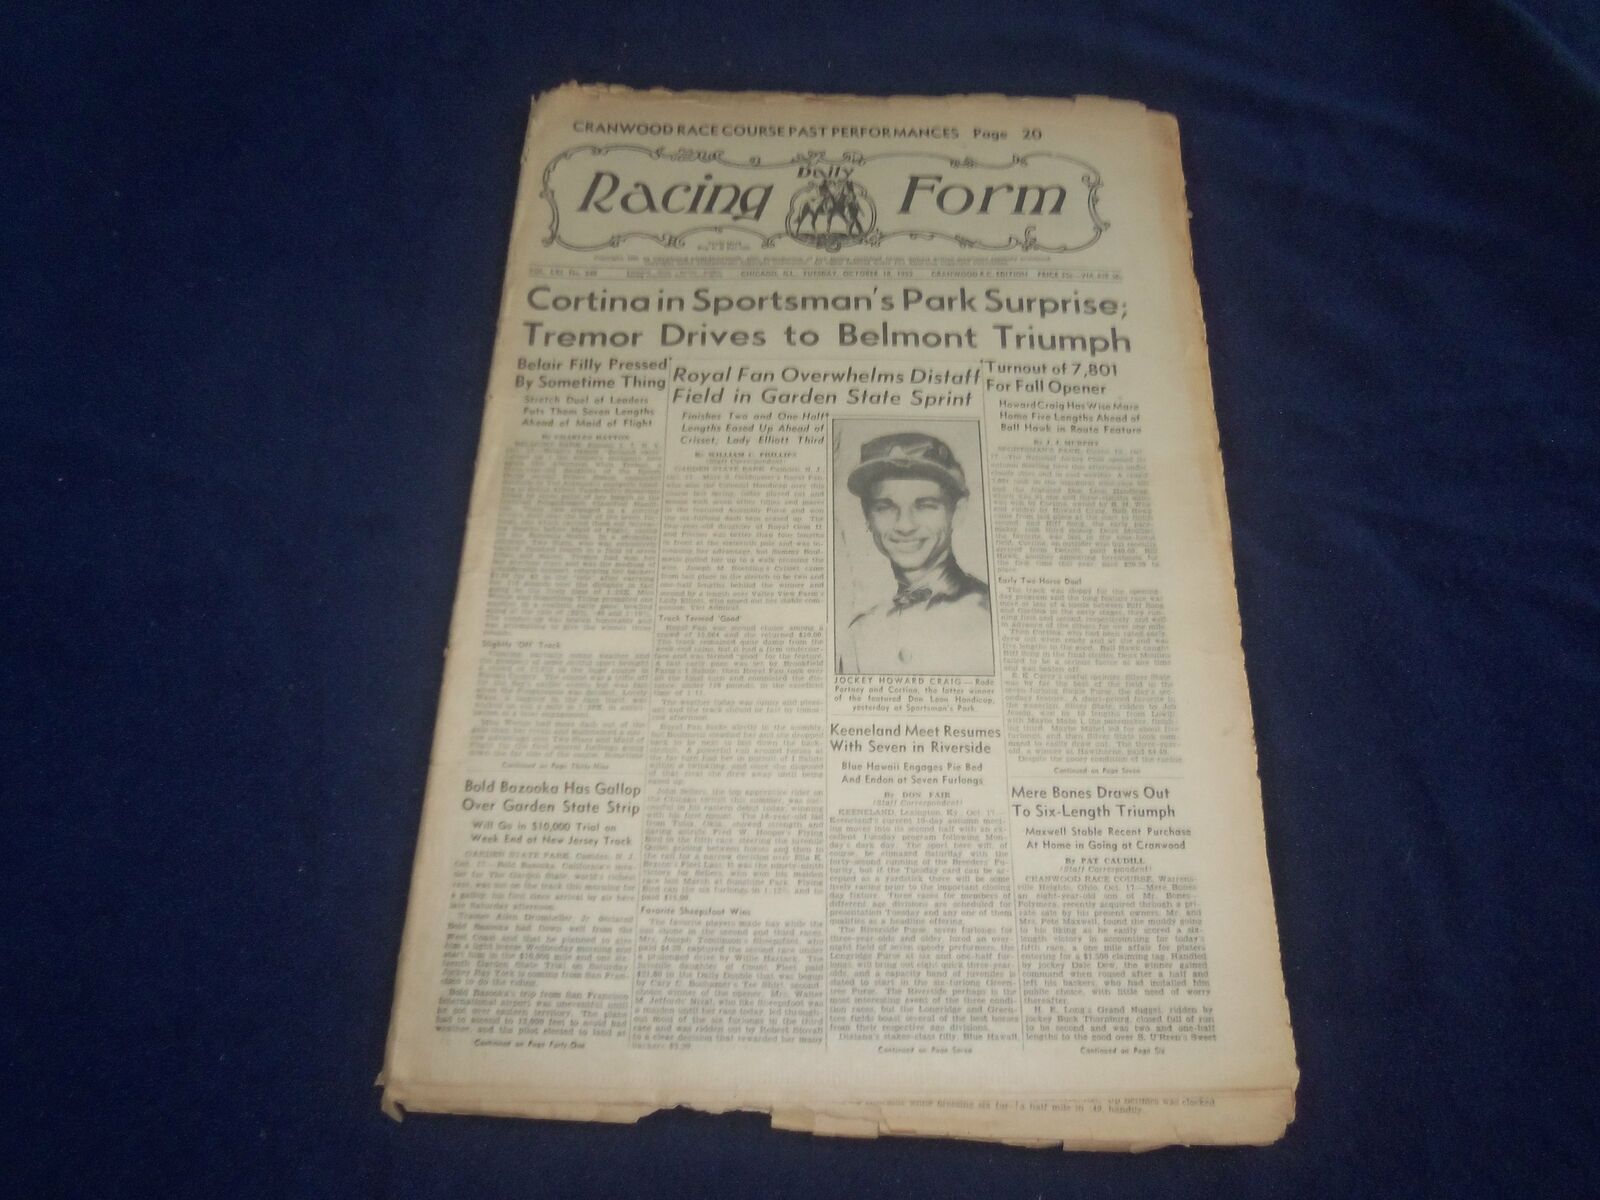 1955 OCT 18 THE DAILY RACING FORM - CORTINA SPORTSMAN\'S PARK SURPRISE - NP 5490